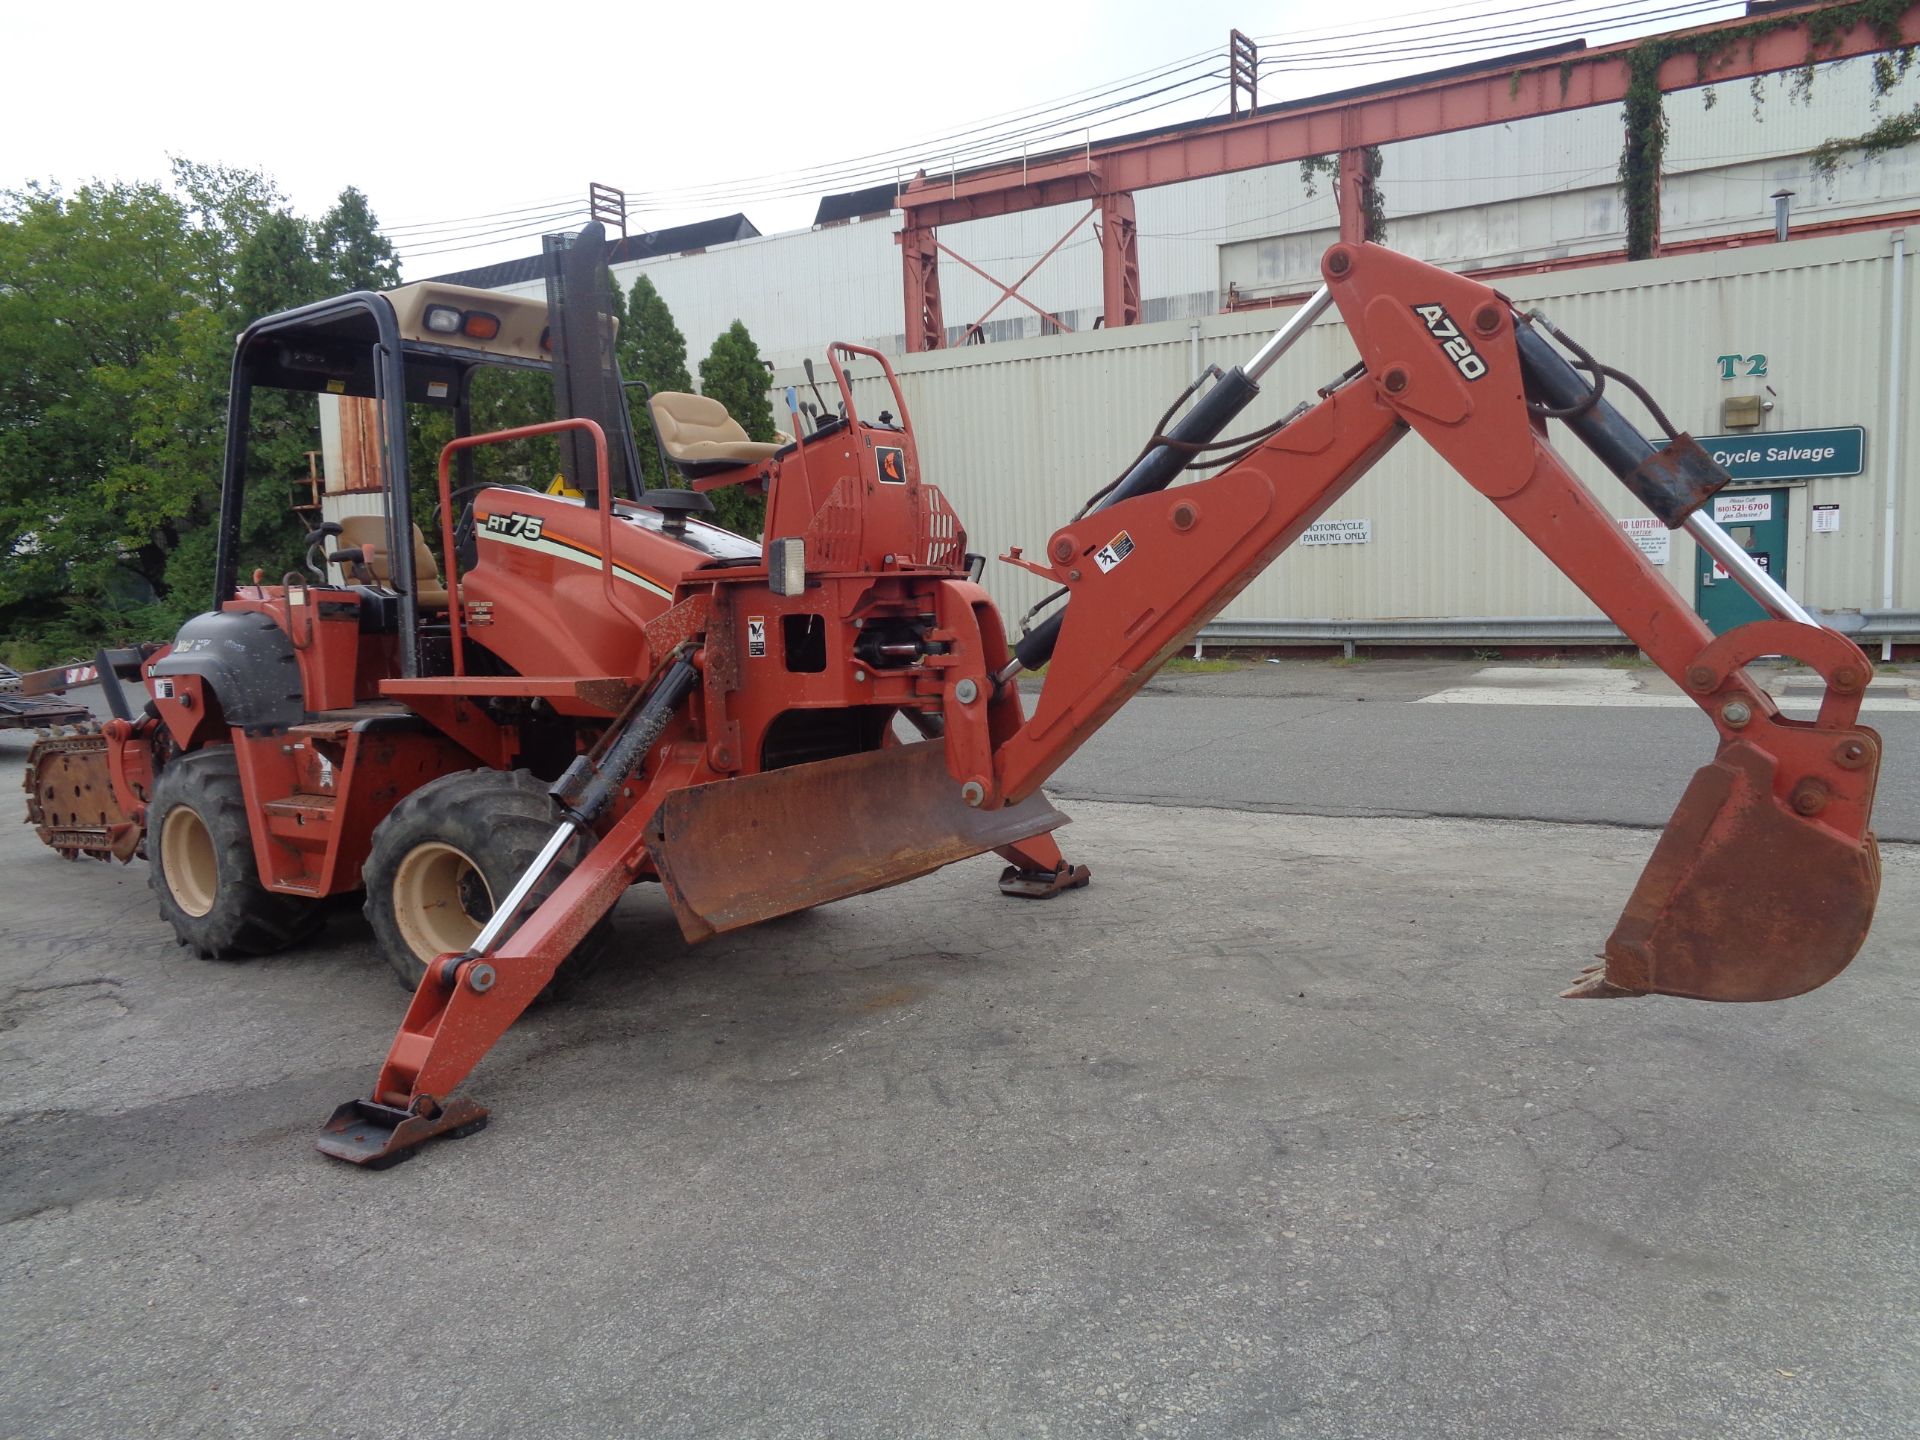 2008 Ditch Witch RT75 Trencher Backhoe - Image 18 of 18